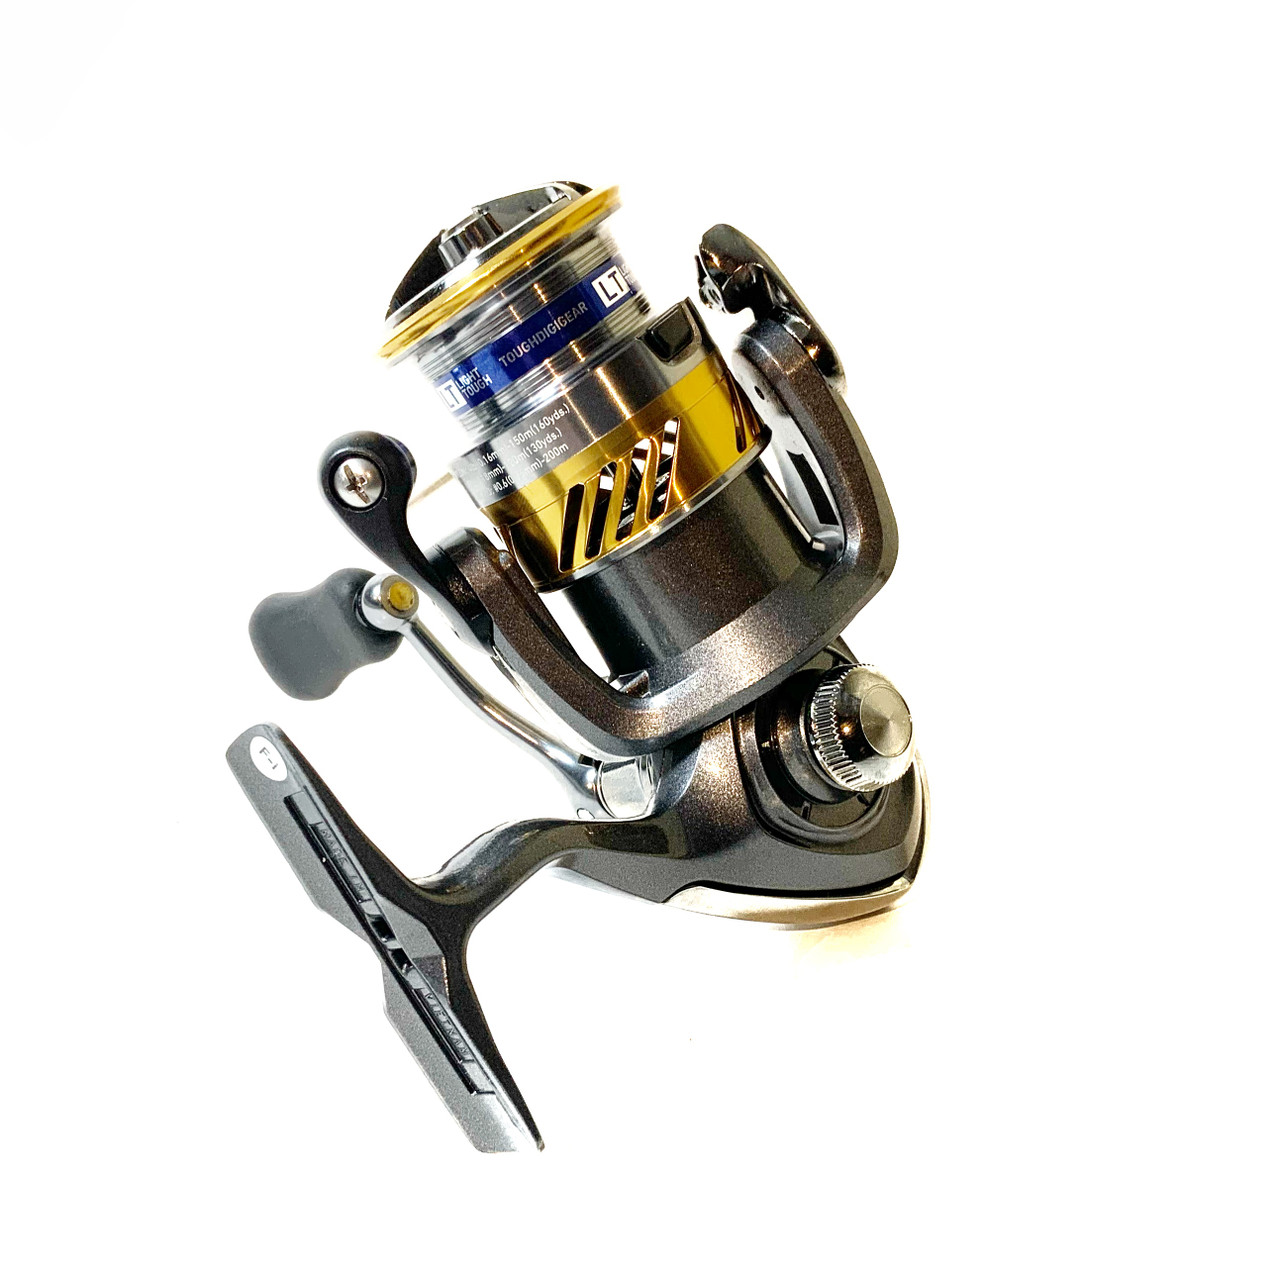 The NEW Daiwa Laguna is better than I expected for a $50 - 5000 sized reel.  